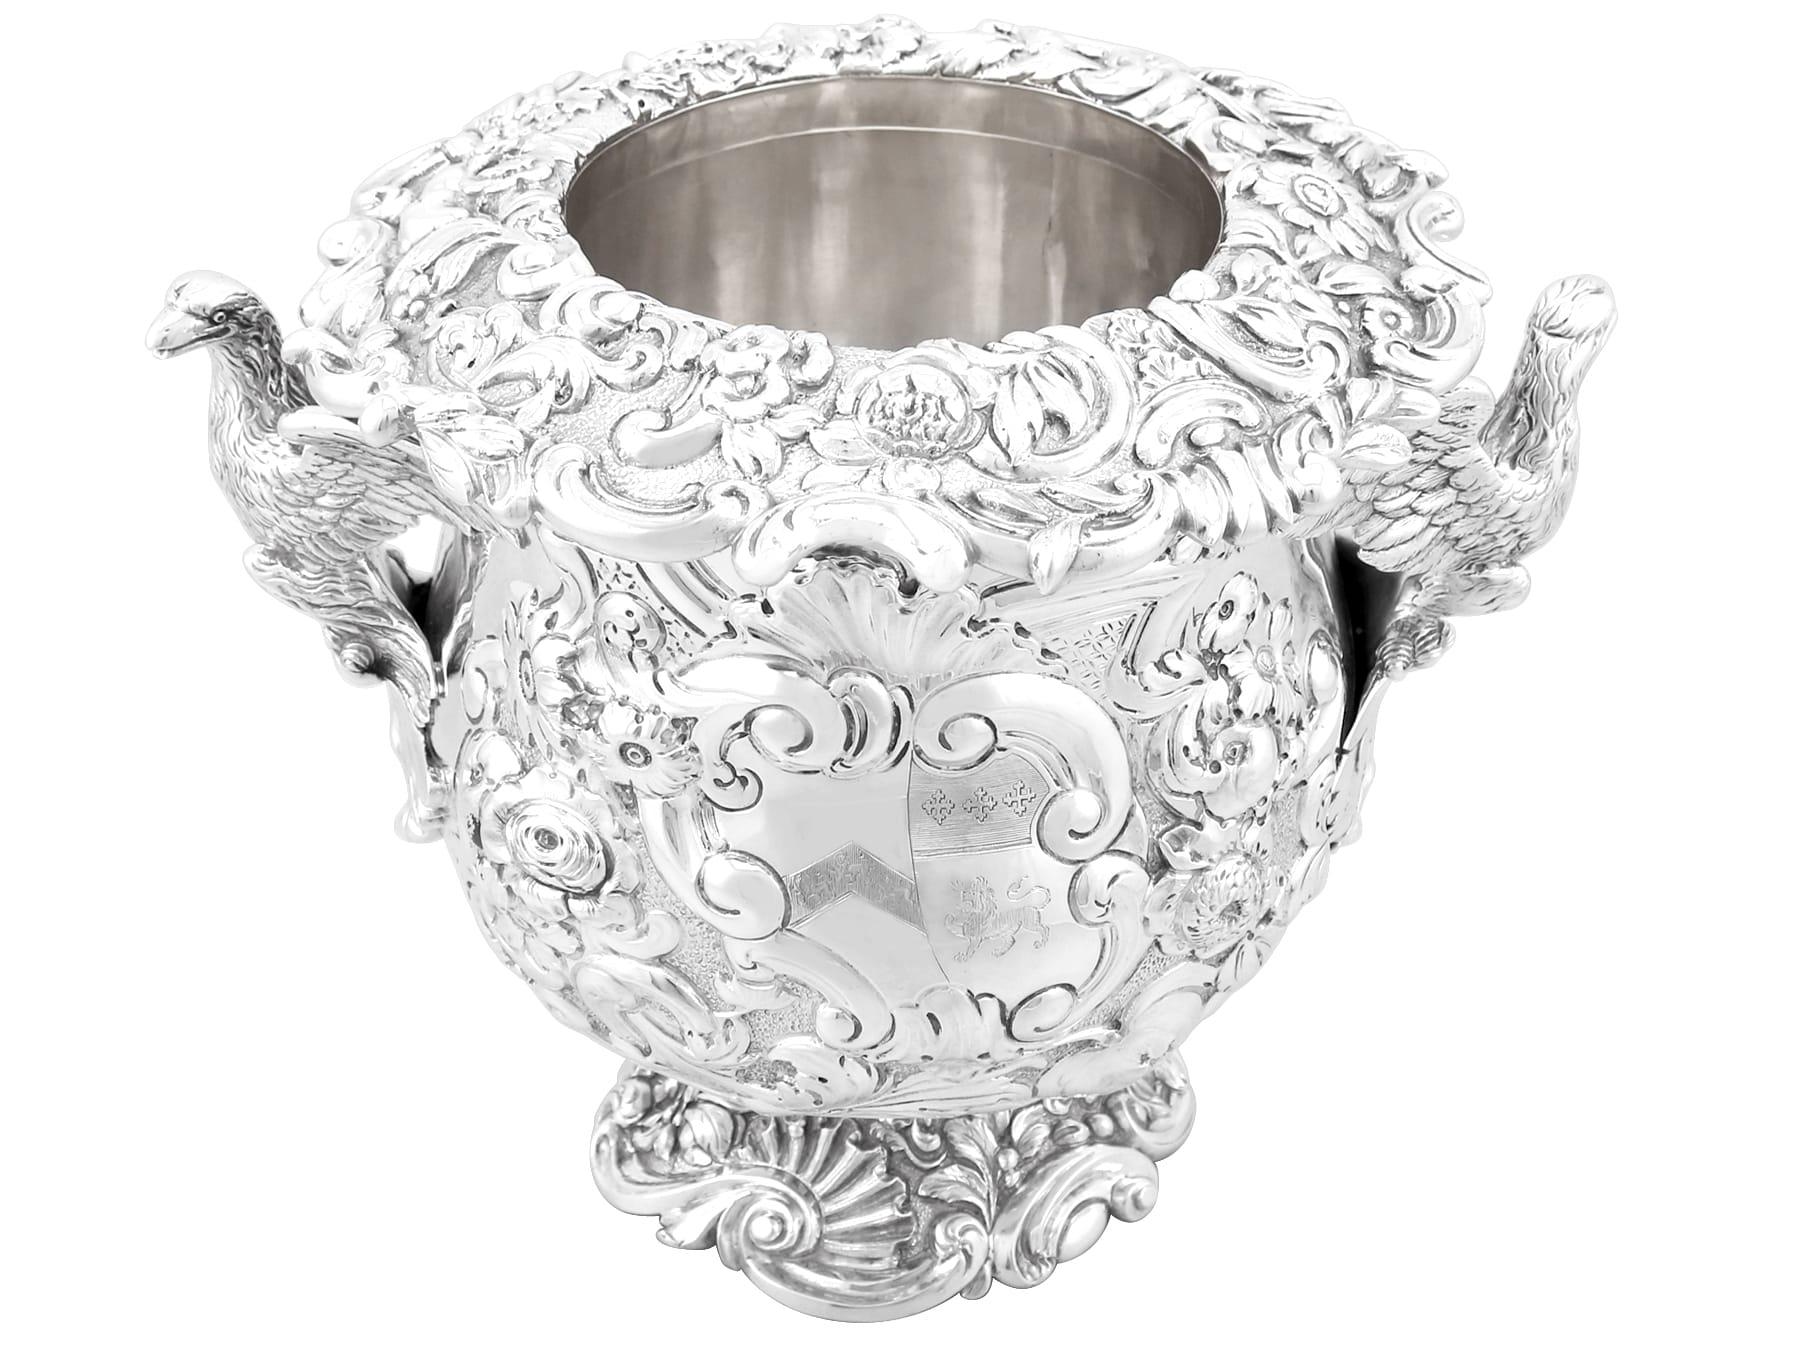 A magnificent, fine and impressive antique Georgian English sterling silver wine cooler made by Henry Chawner; an addition to our antique wine and drink related silverware collection

This magnificent antique George III sterling silver wine cooler